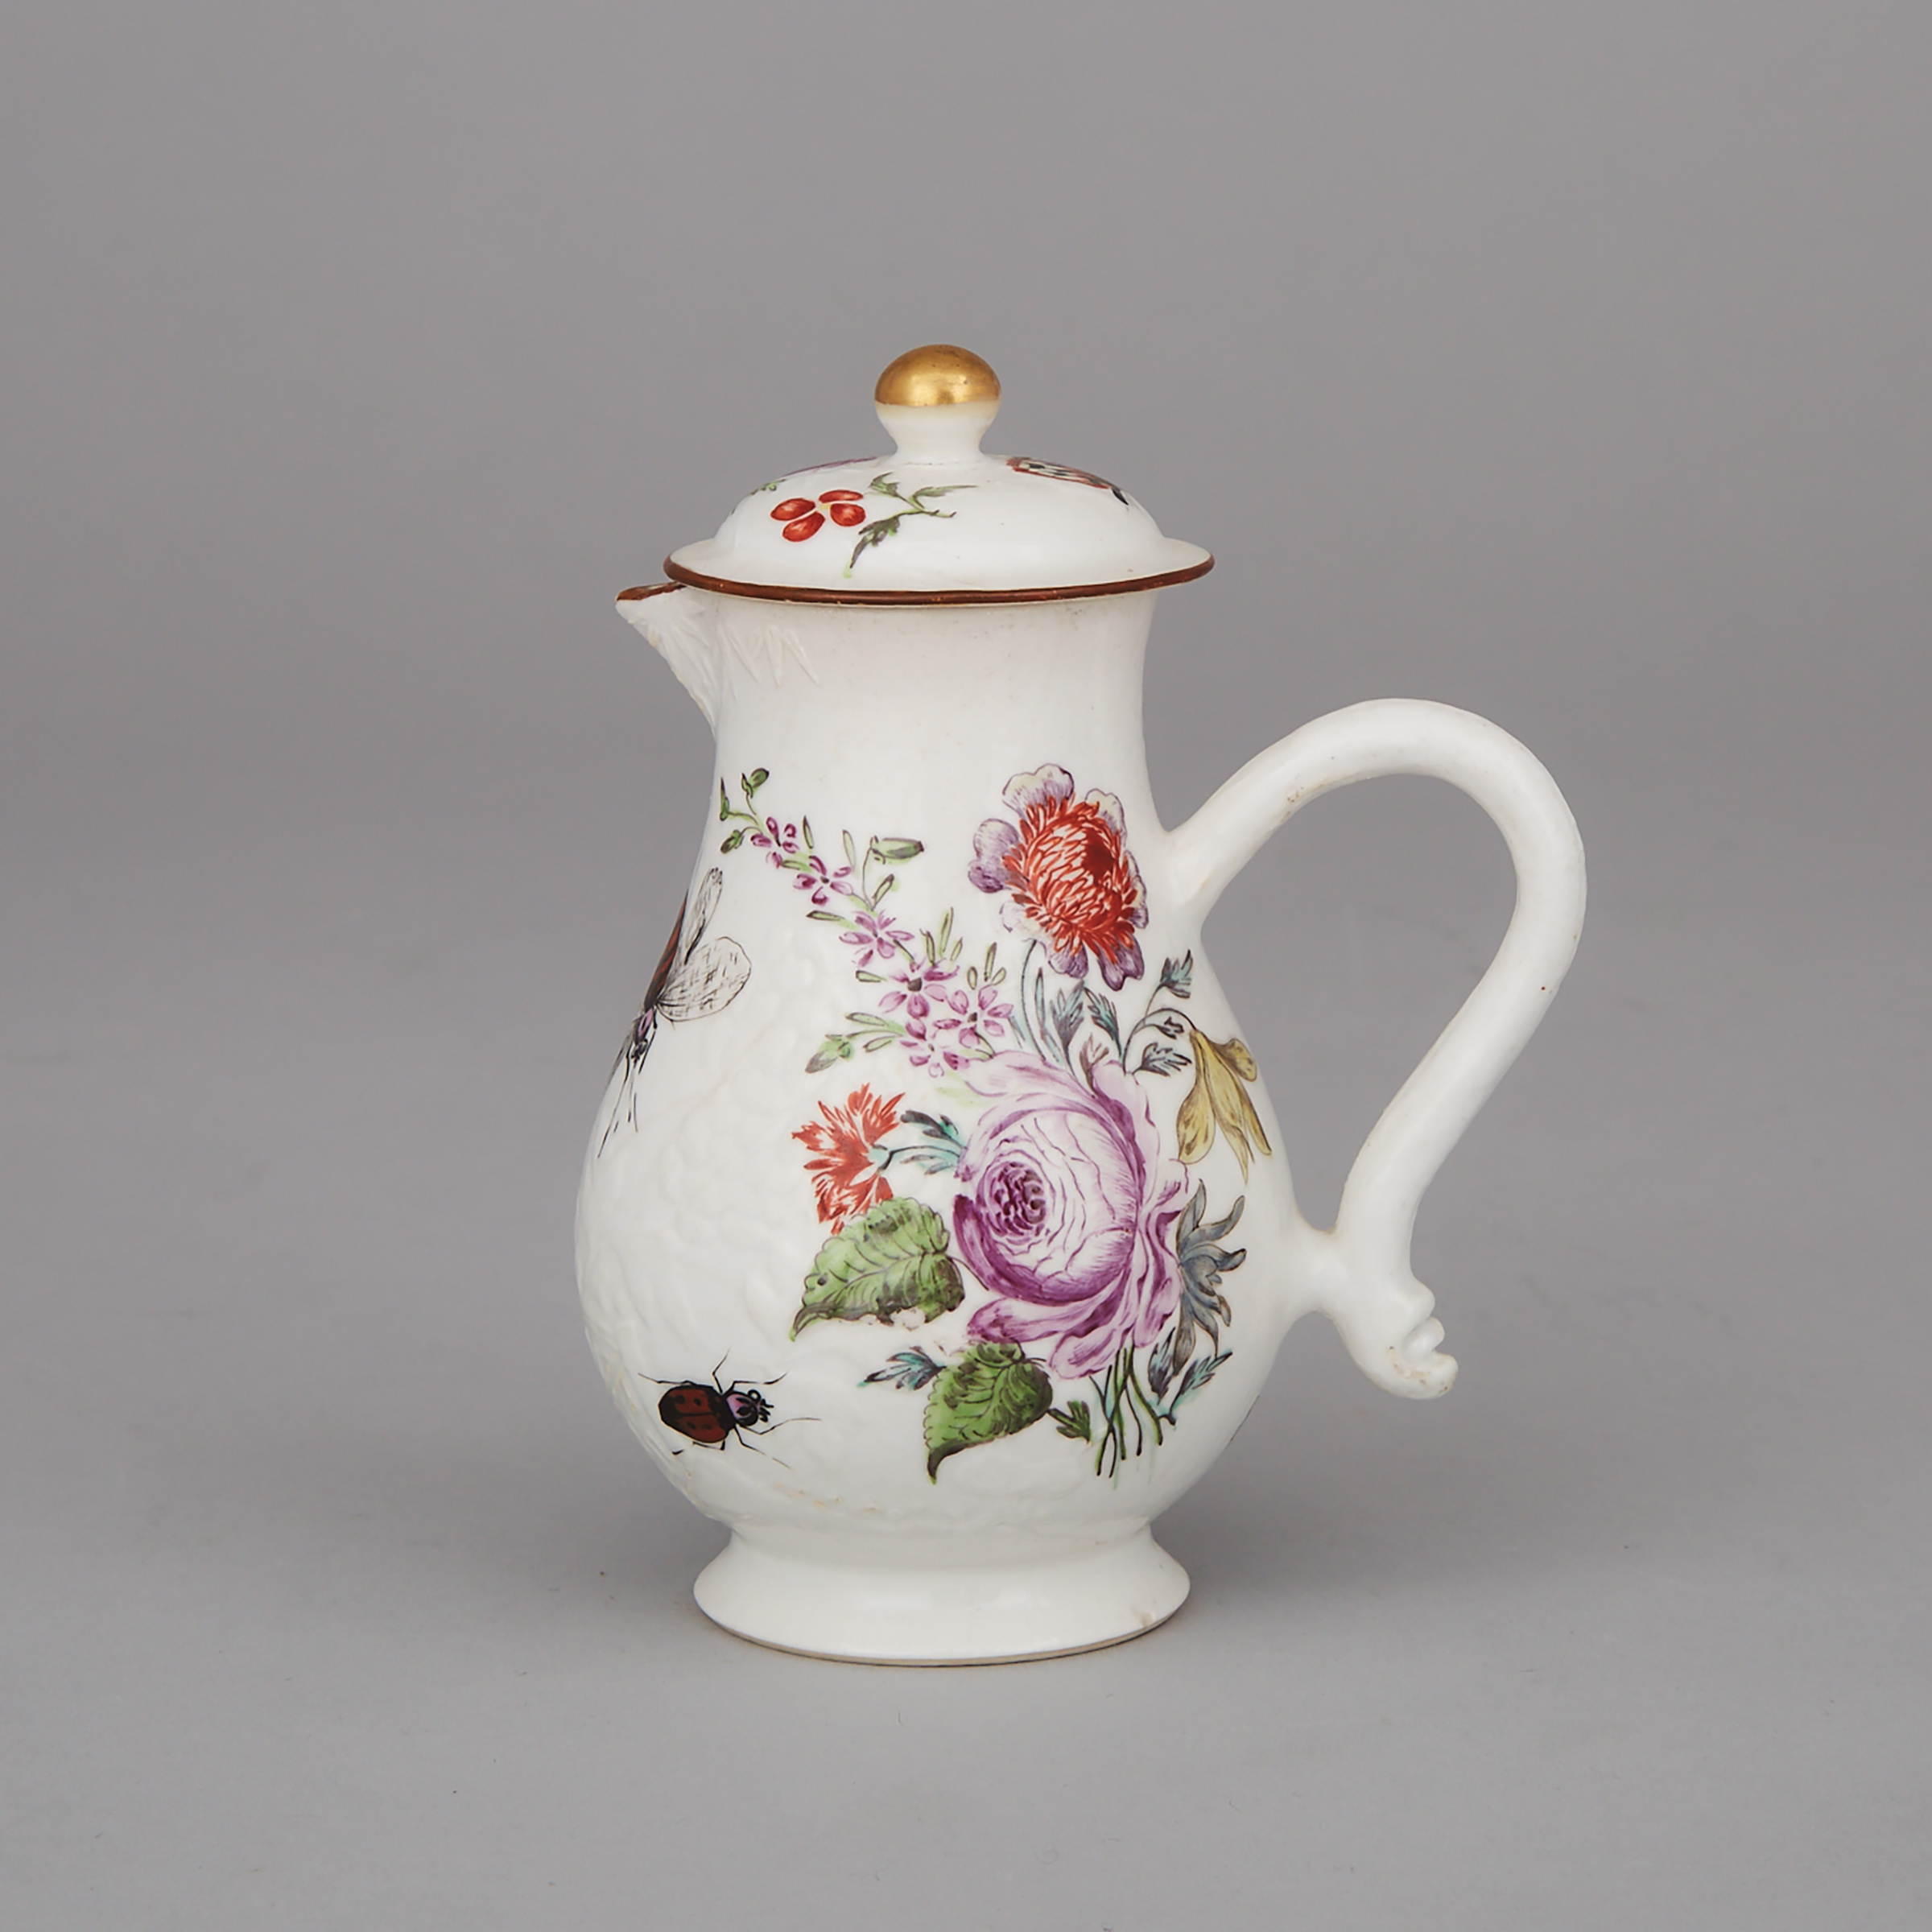 Chinese Export Porcelain Covered Cream Jug, c.1760